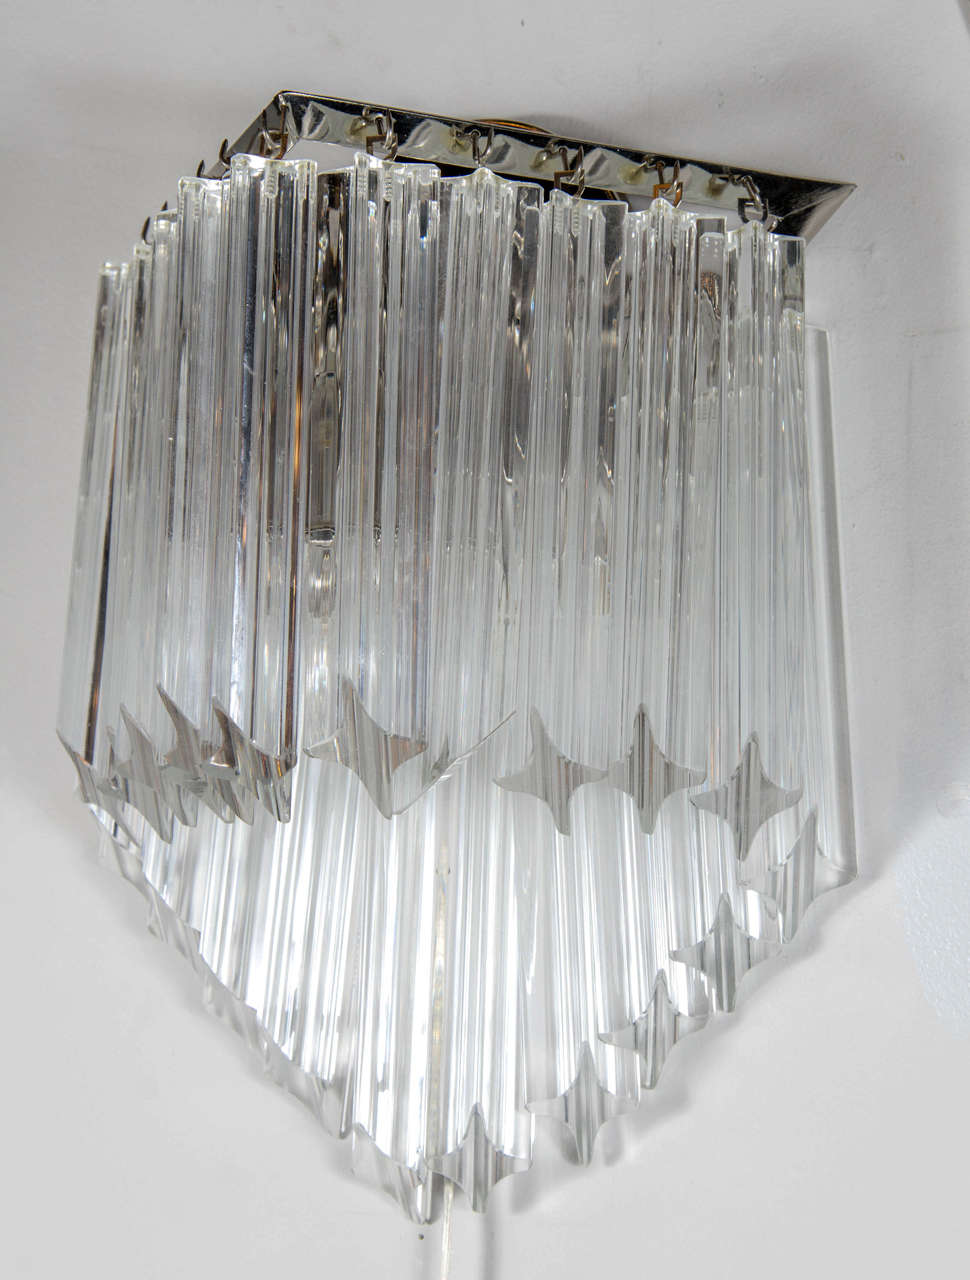 Ultra Chic Pair of Mid-Century Modernist Triedre Cut-Crystal Camer Sconces For Sale 1